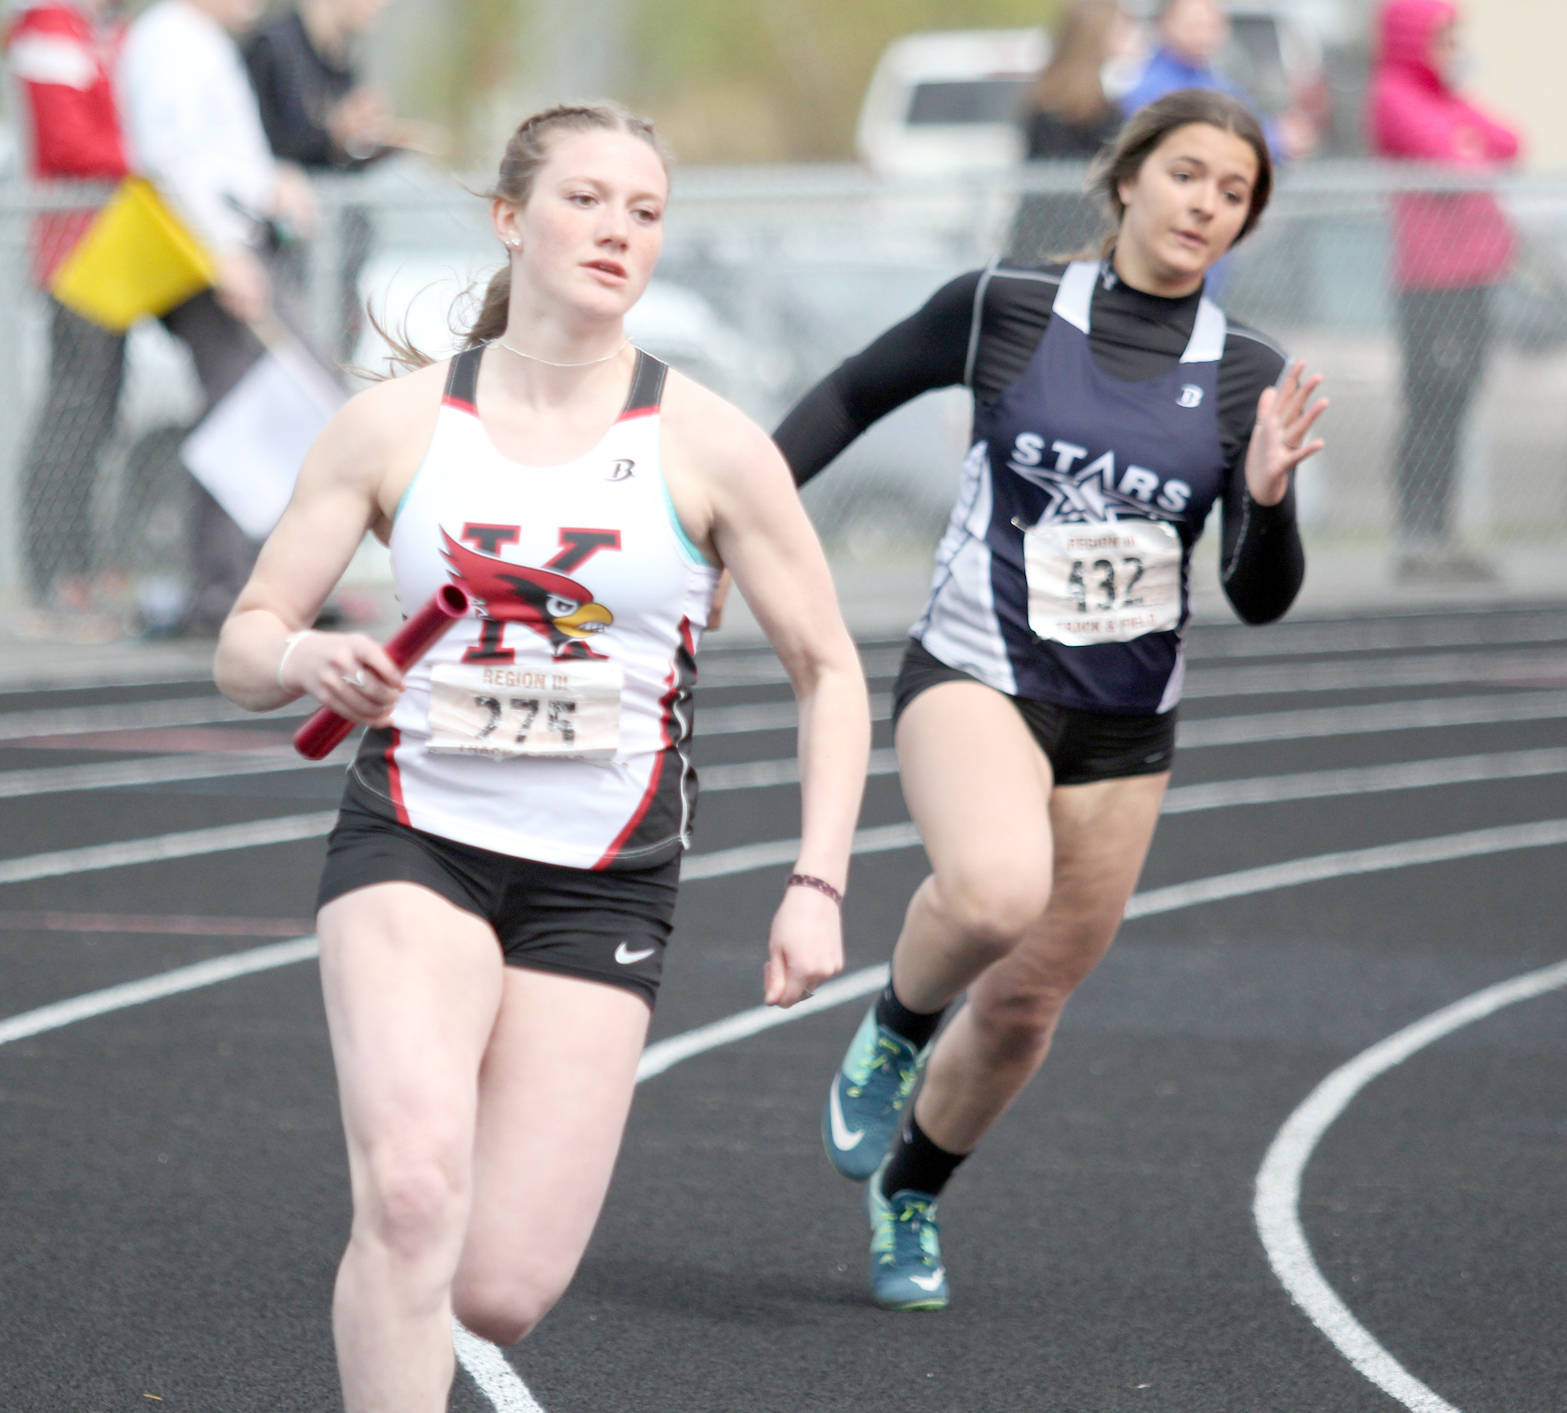 Kenai Central’s Addison Gibson and Mikayla Leadens of Soldotna compete in the 800-meter relay Saturday, May 19, 2018, at Houston High School. (Photo by Jeremiah Bartz/Frontiersman.com)